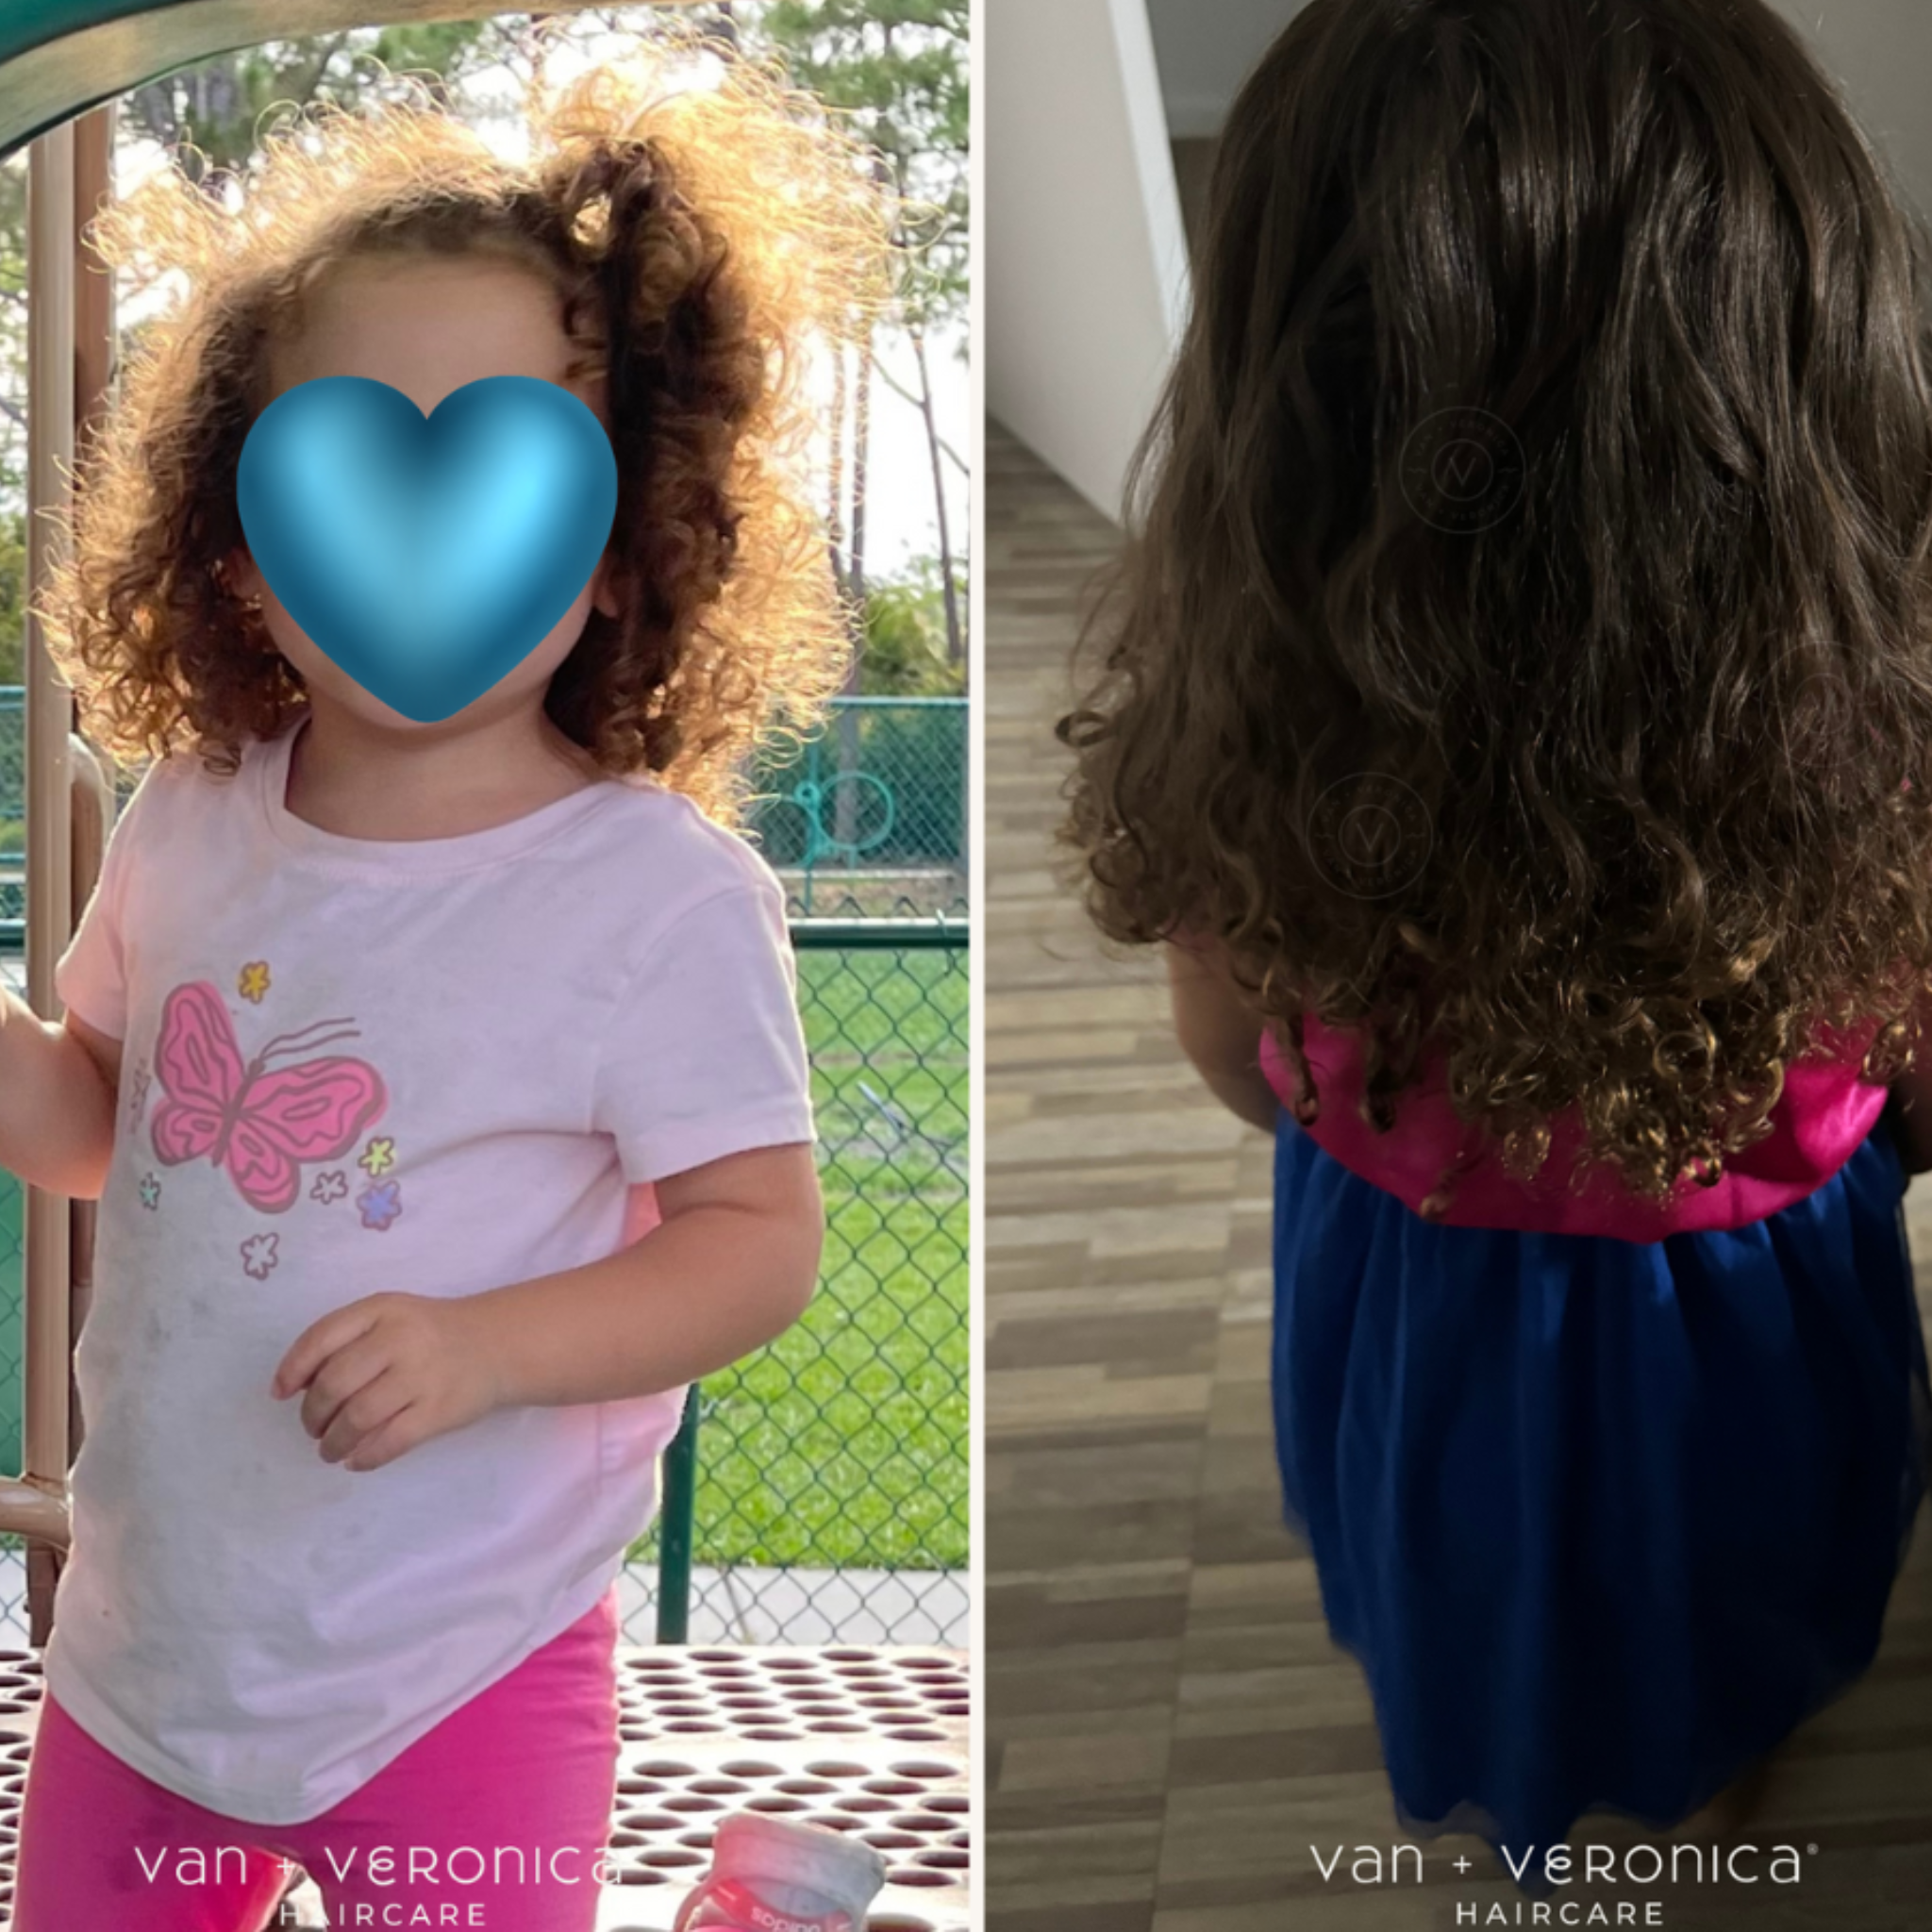 Little girl with curly hair. Before: tangles and frizz. After: Detangled shiny curls after using van + veronica Haircare products